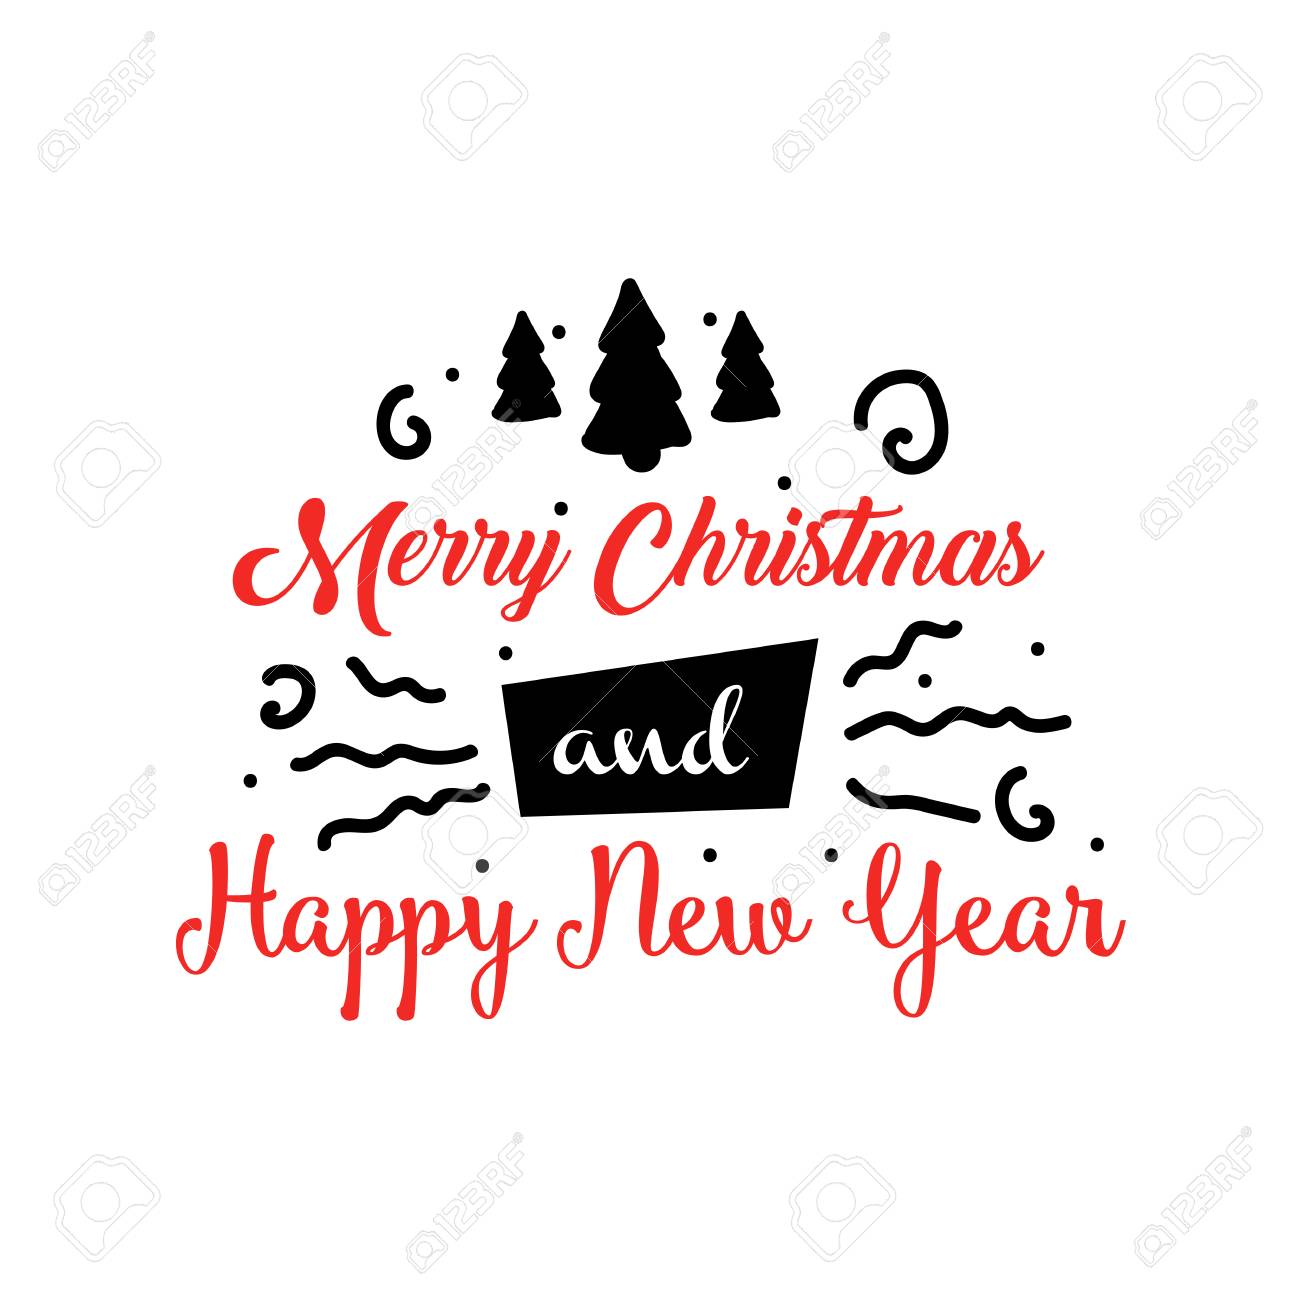 Banner or greeting card for Merry Christmas and Happy New Year.